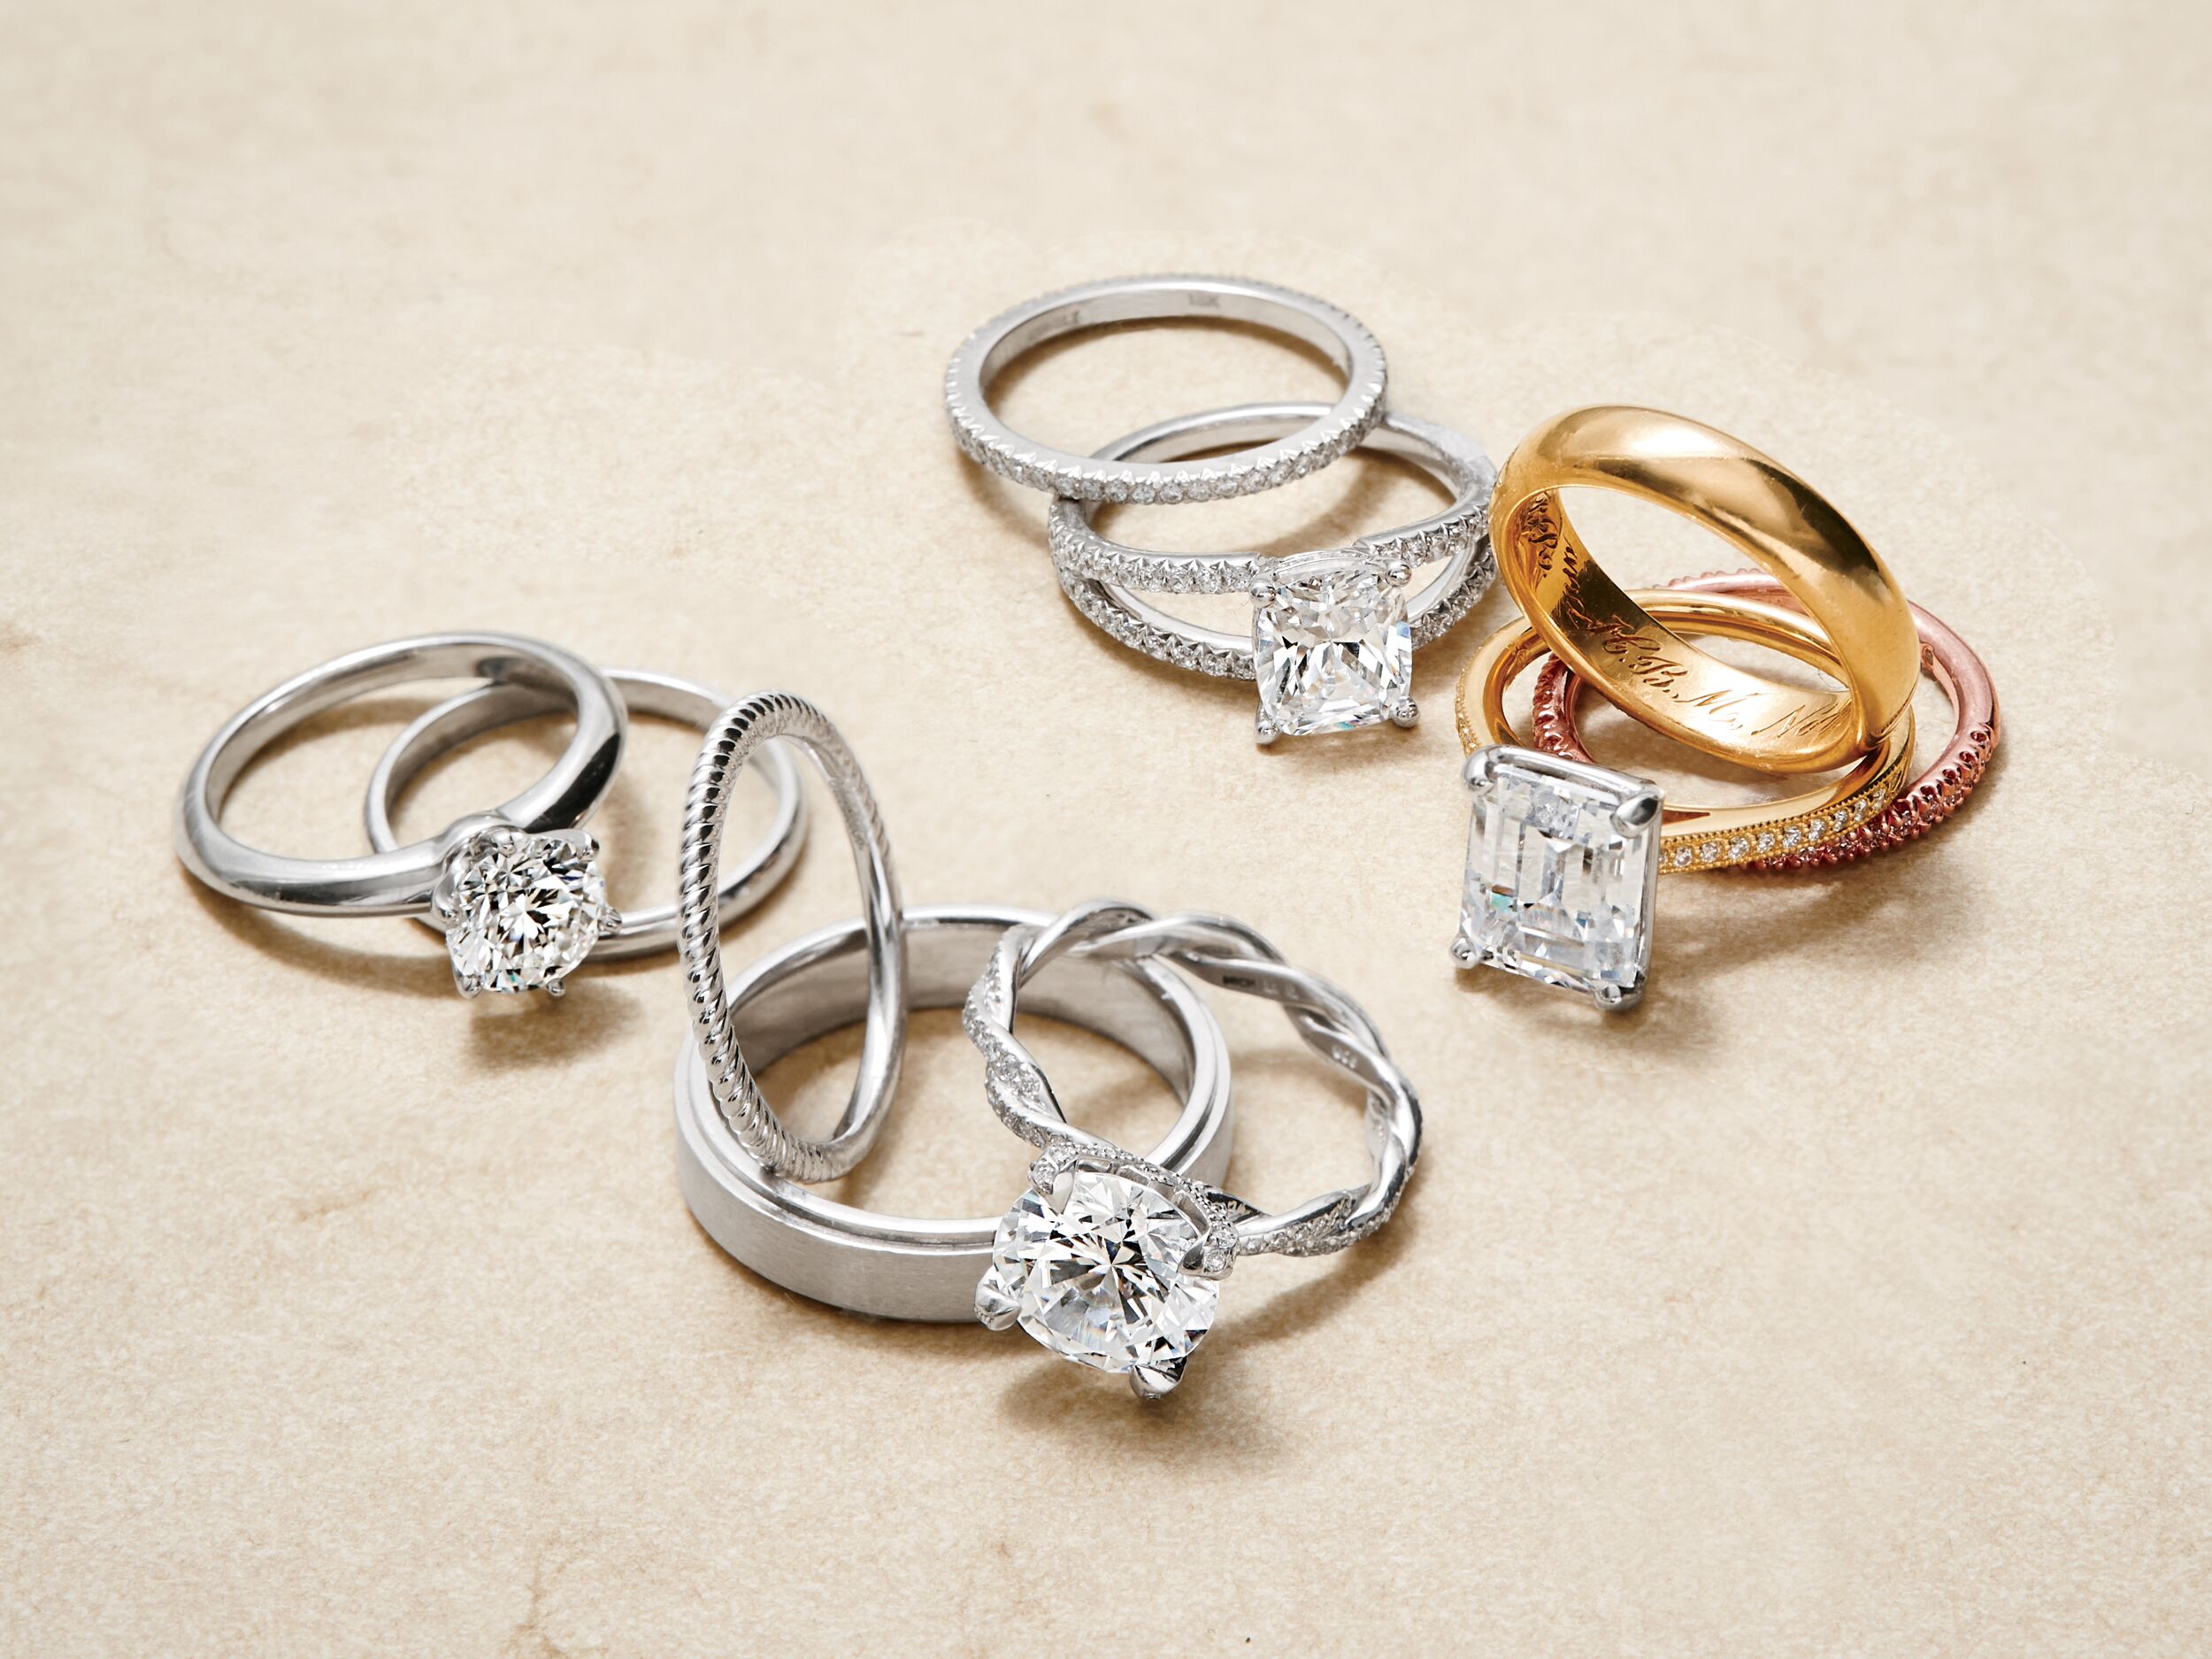 should wedding rings be gold or silver